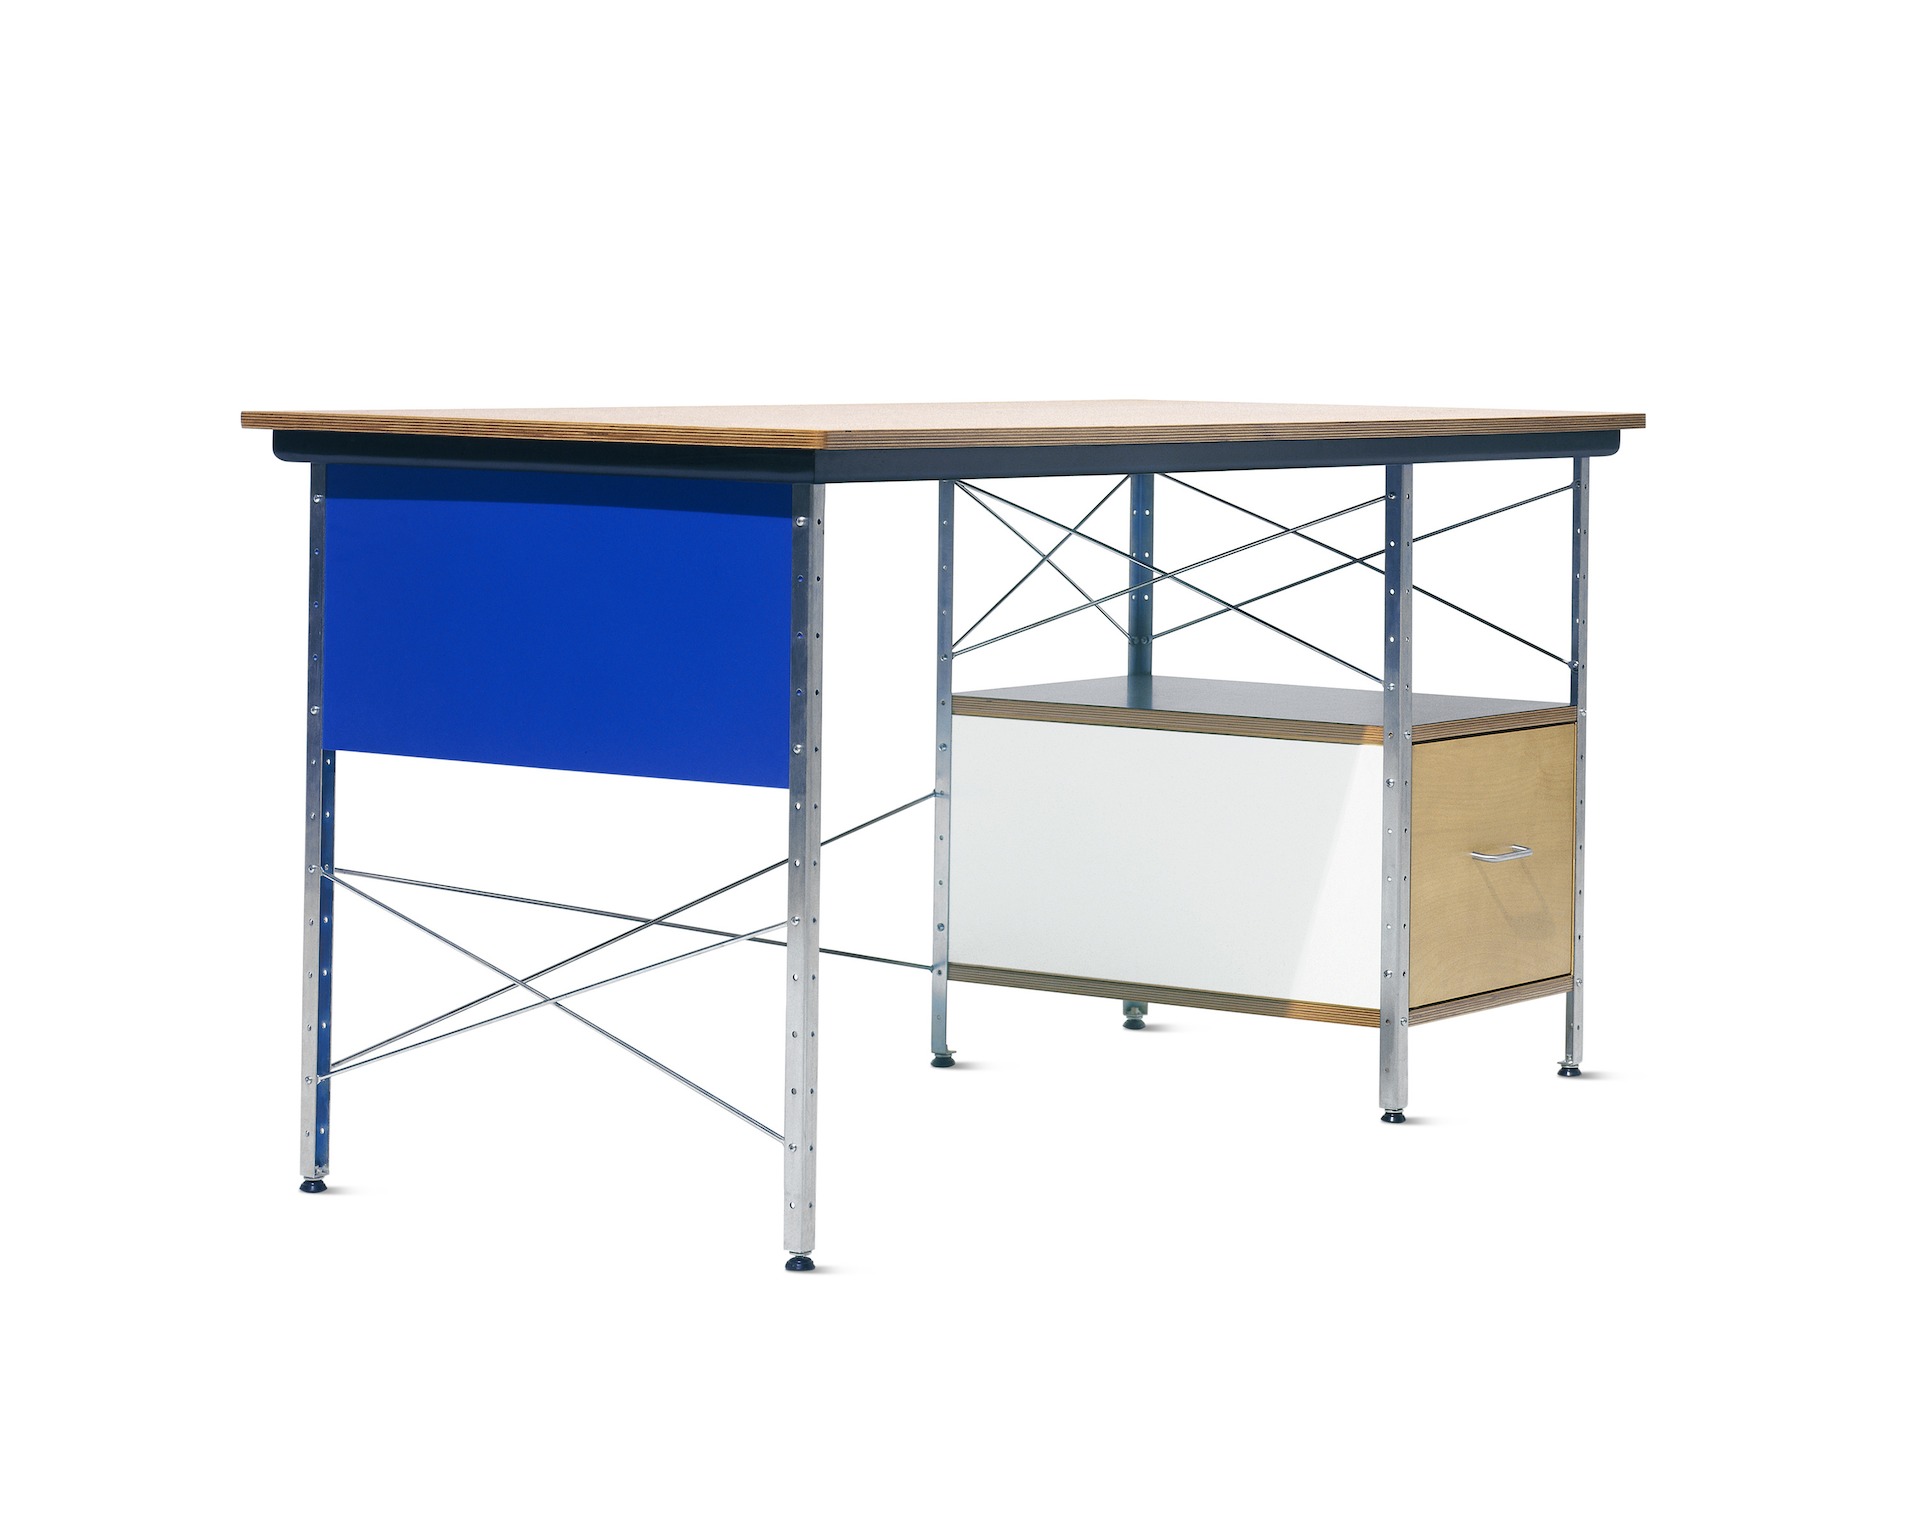 An Eames Desk with a metal frame, colored panel, and drawer.